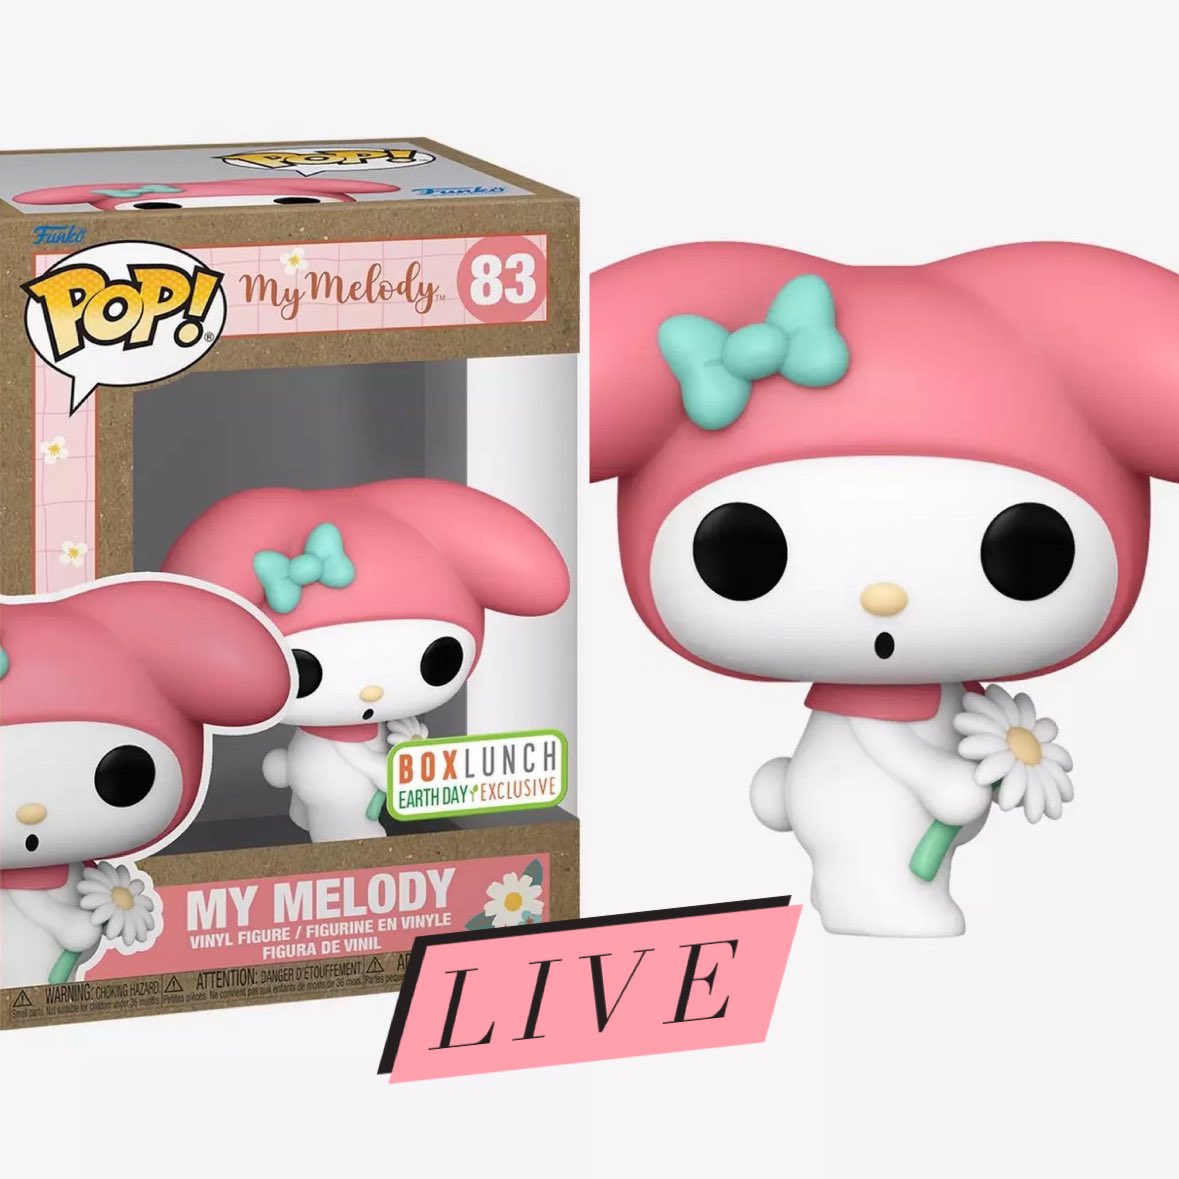 Now live! The super cute new My Melody w/ Flower Funko POP! Grab this Earth Day exclusive below ~
Linky ~ bit.ly/3W4AgWT
#Ad #MyMelody #Sanrio #FPN #FunkoPOPNews #Funko #POP #POPVinyl #FunkoPOP #FunkoSoda